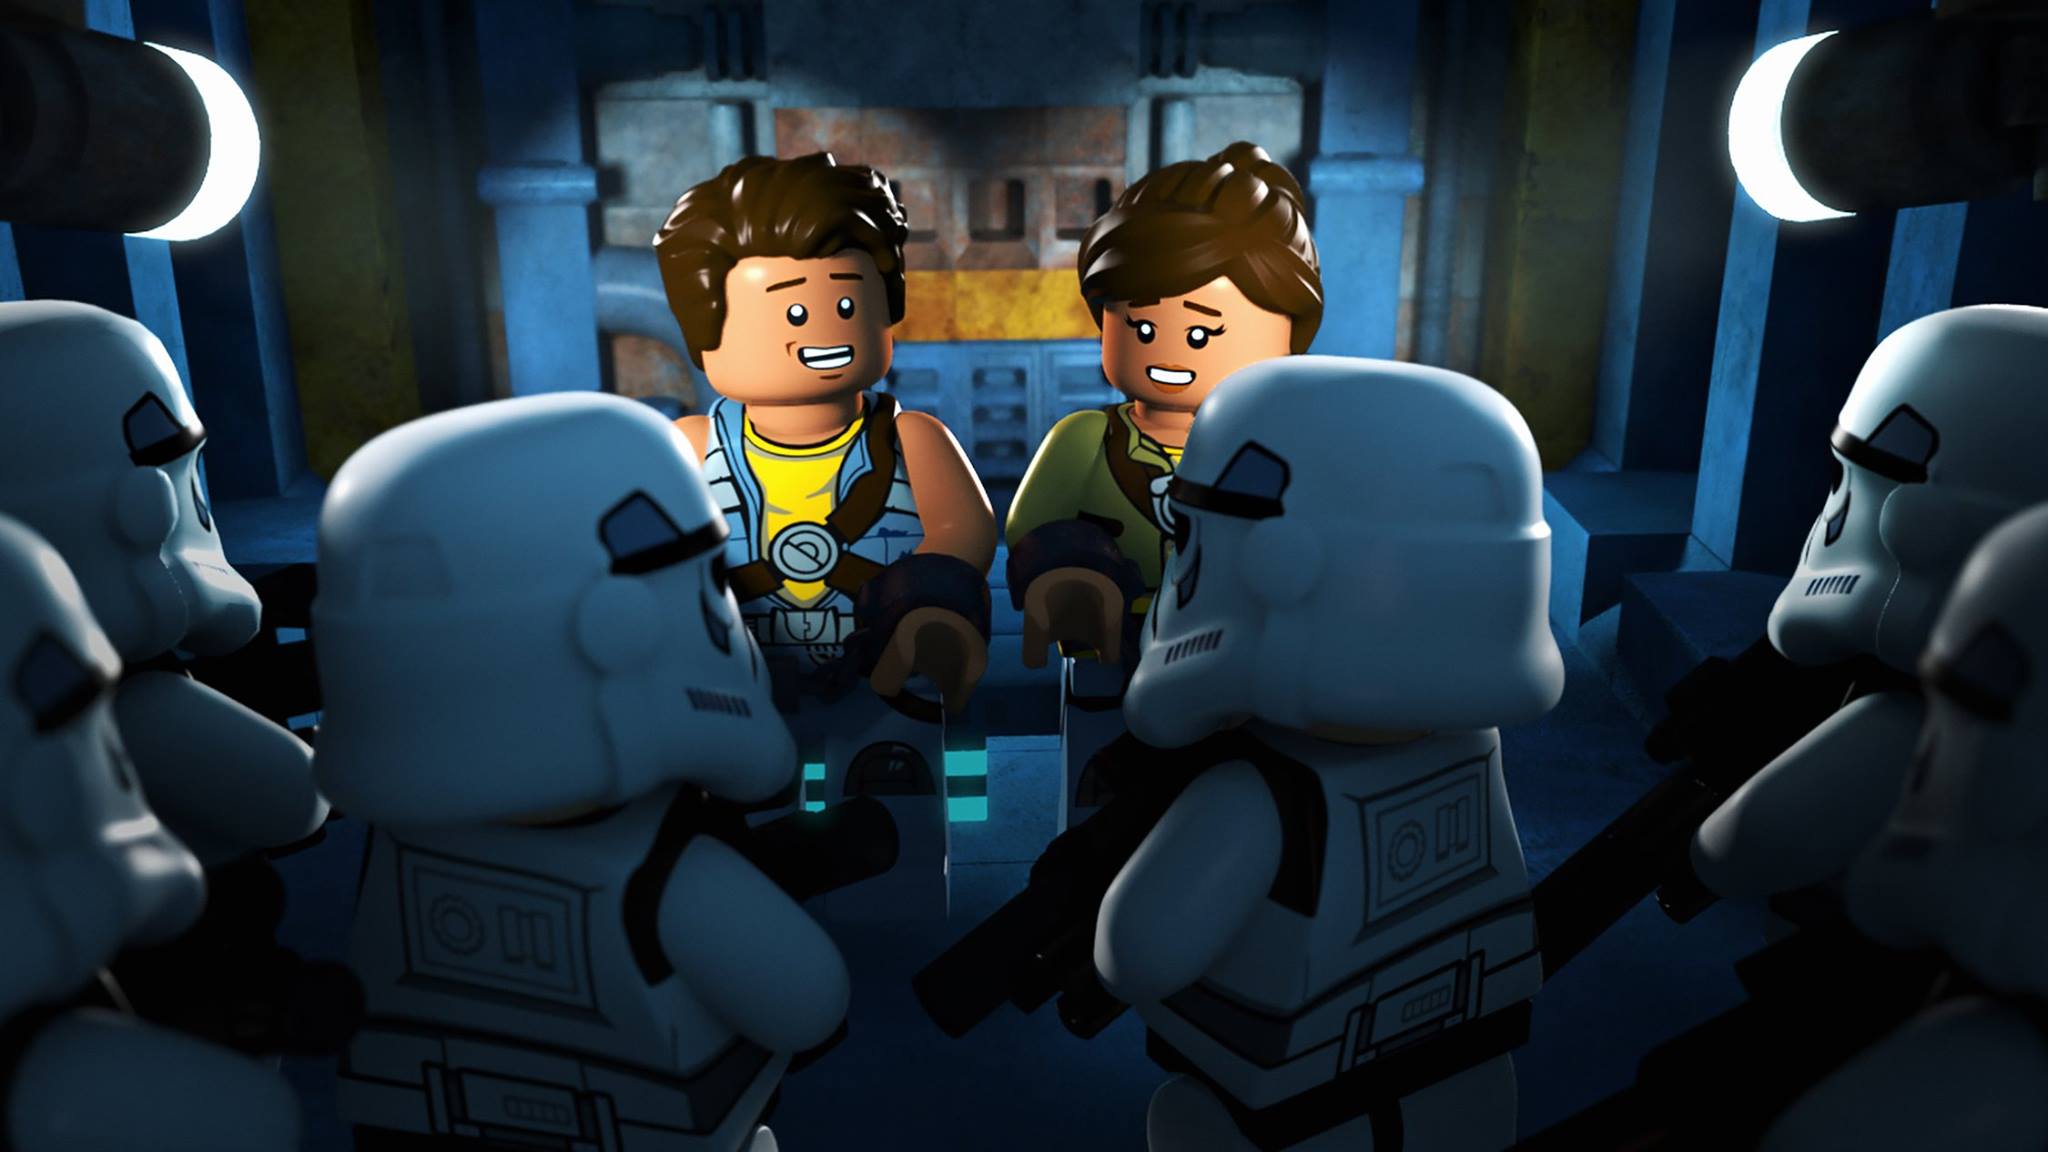 My thoughts on LEGO Star Wars: The Freemaker Adventures after sitting down with Executive Producers Bill Motz and Bob Roth in LA and getting a sneak peek at the series.